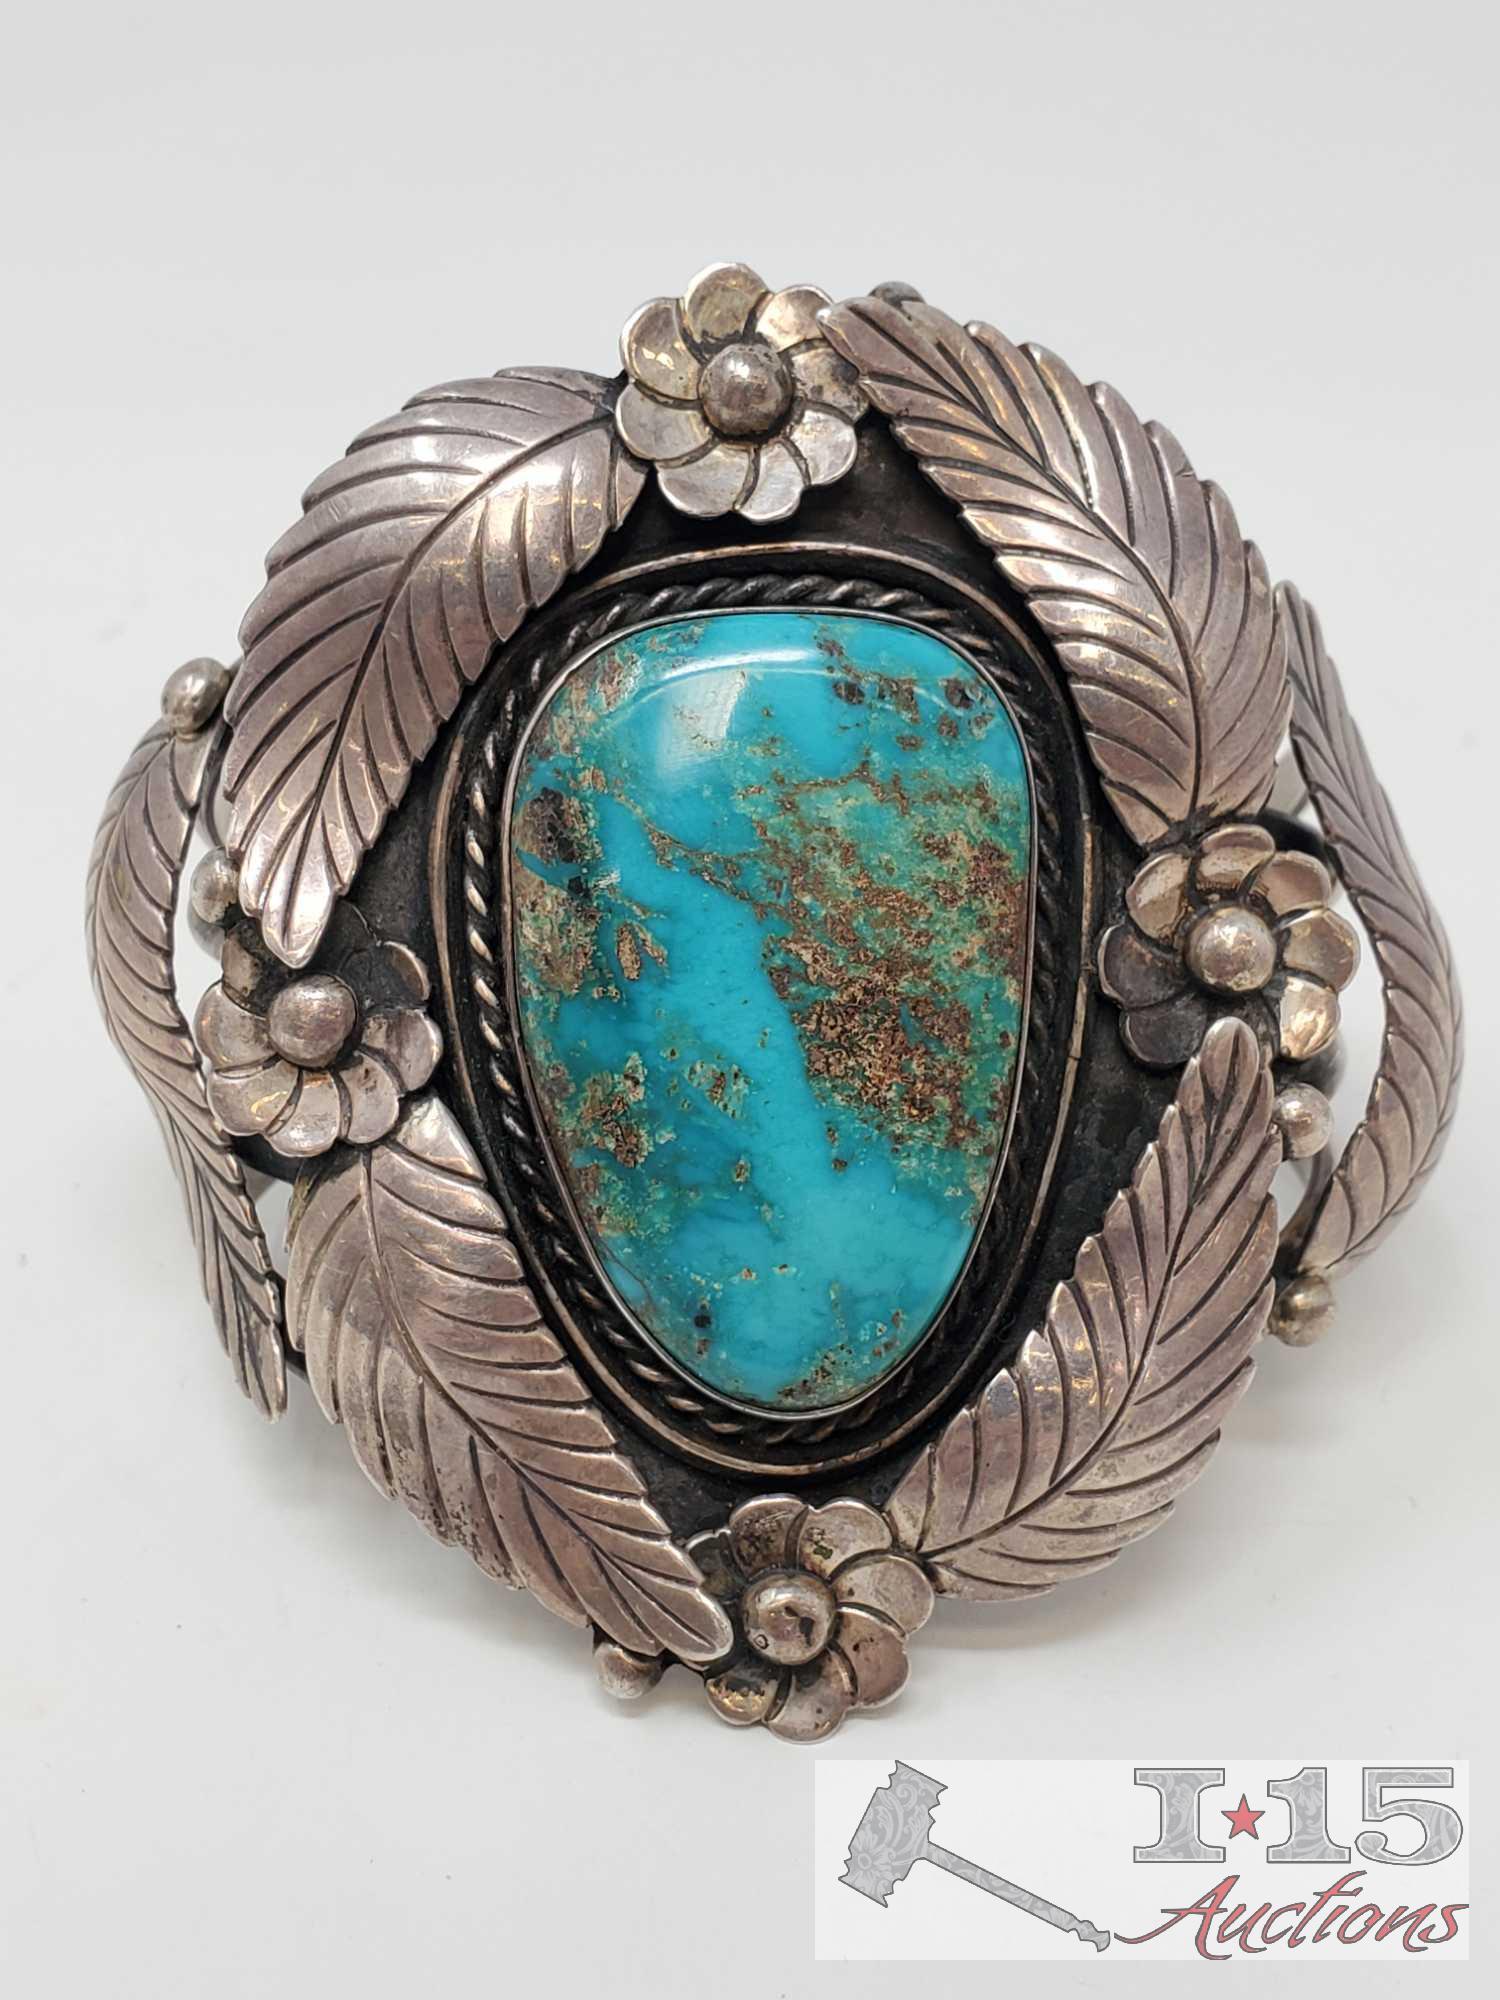 One of a Kind Rare Large Sterling silver Cuff Bracelet with large Turquoise Stone Marked By Artist